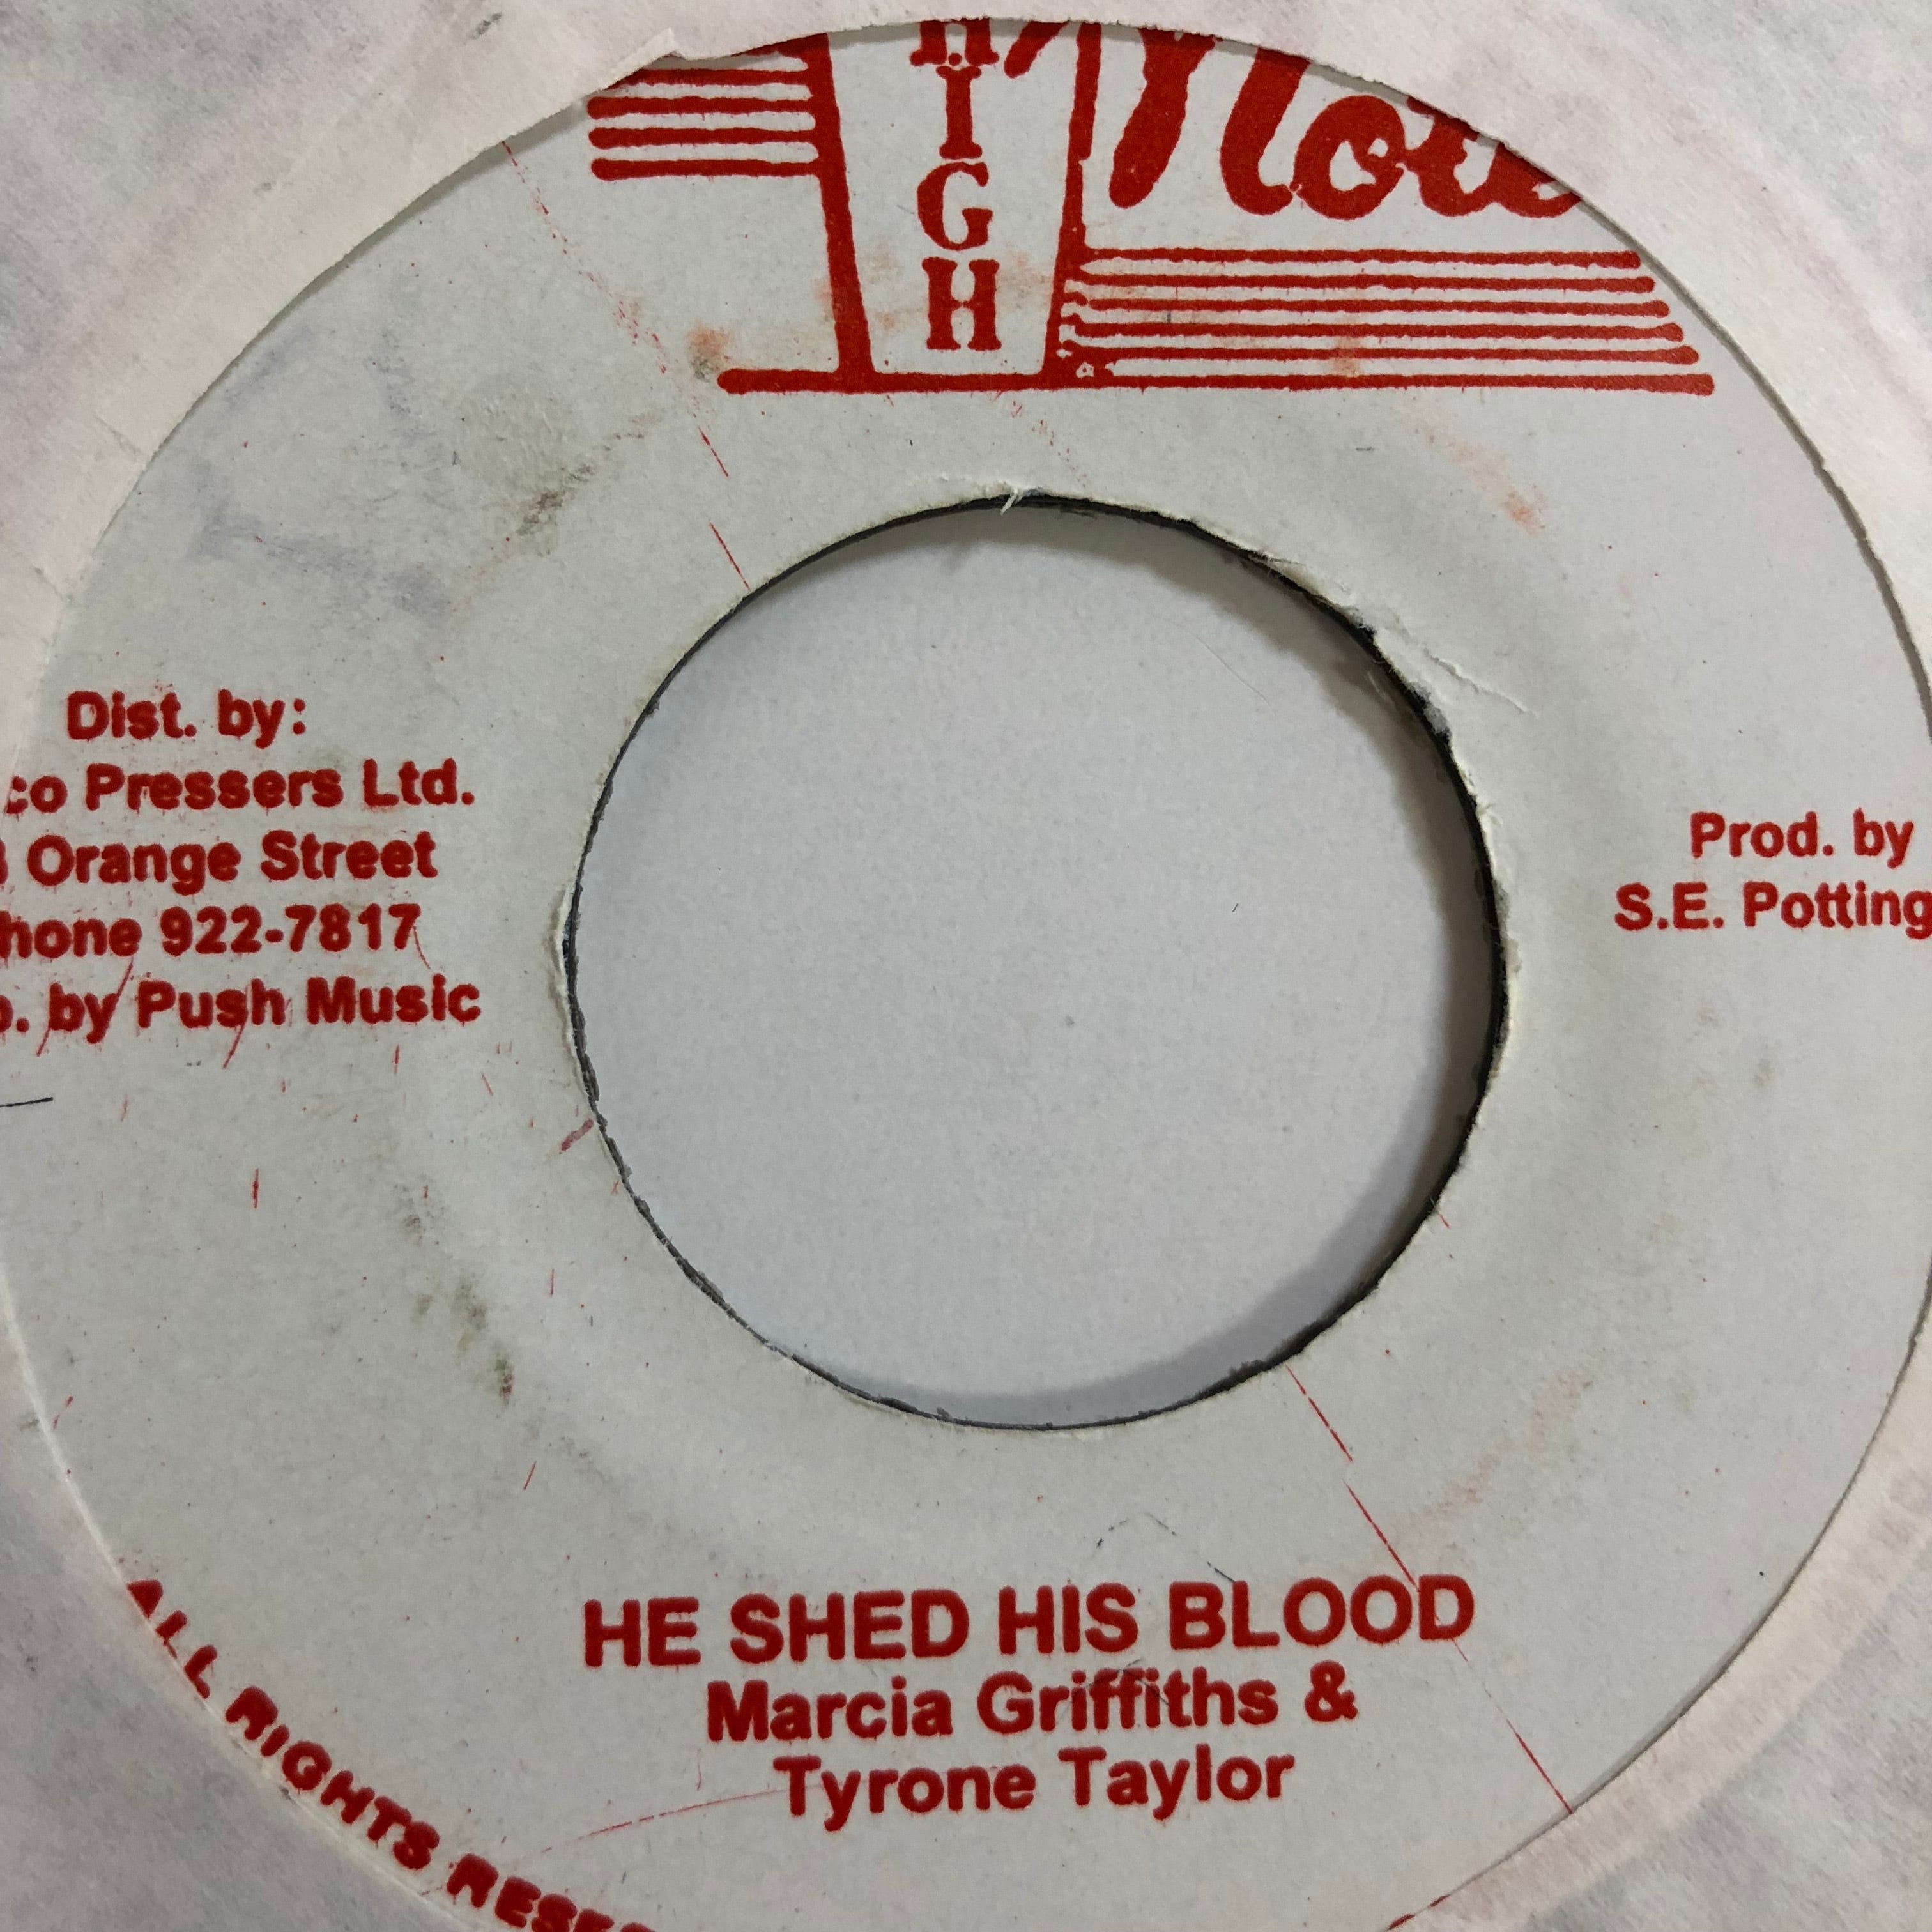 Marcia Griffiths（マーシャグリフィス） & Tyrone Taylor（タイロンテイラー） - He Shed His Blood【7'】